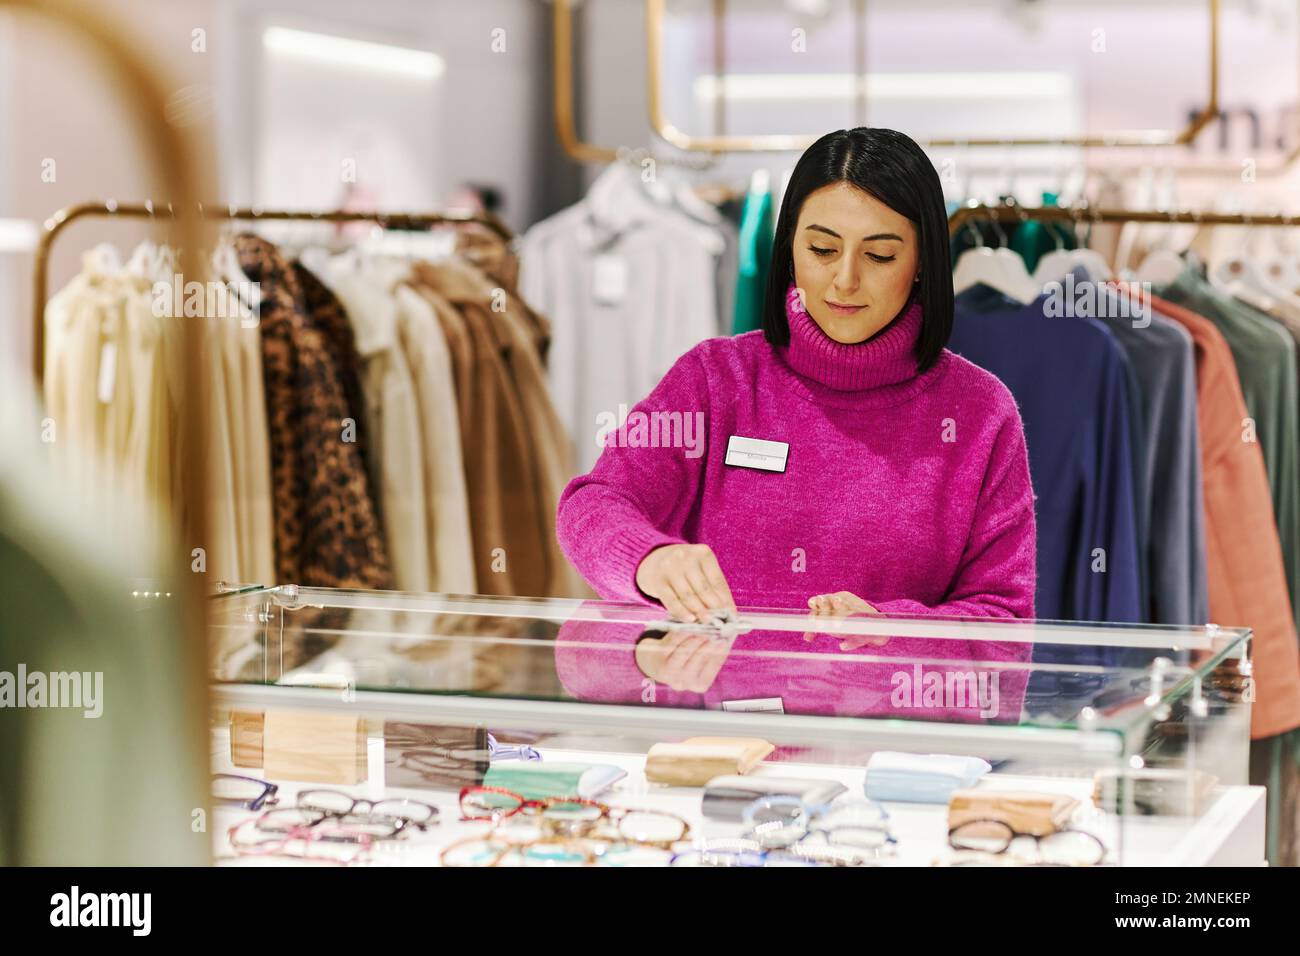 Waist up portrait of young woman wiping glass counter in luxury boutique while preparing shop for opening, copy space Stock Photo